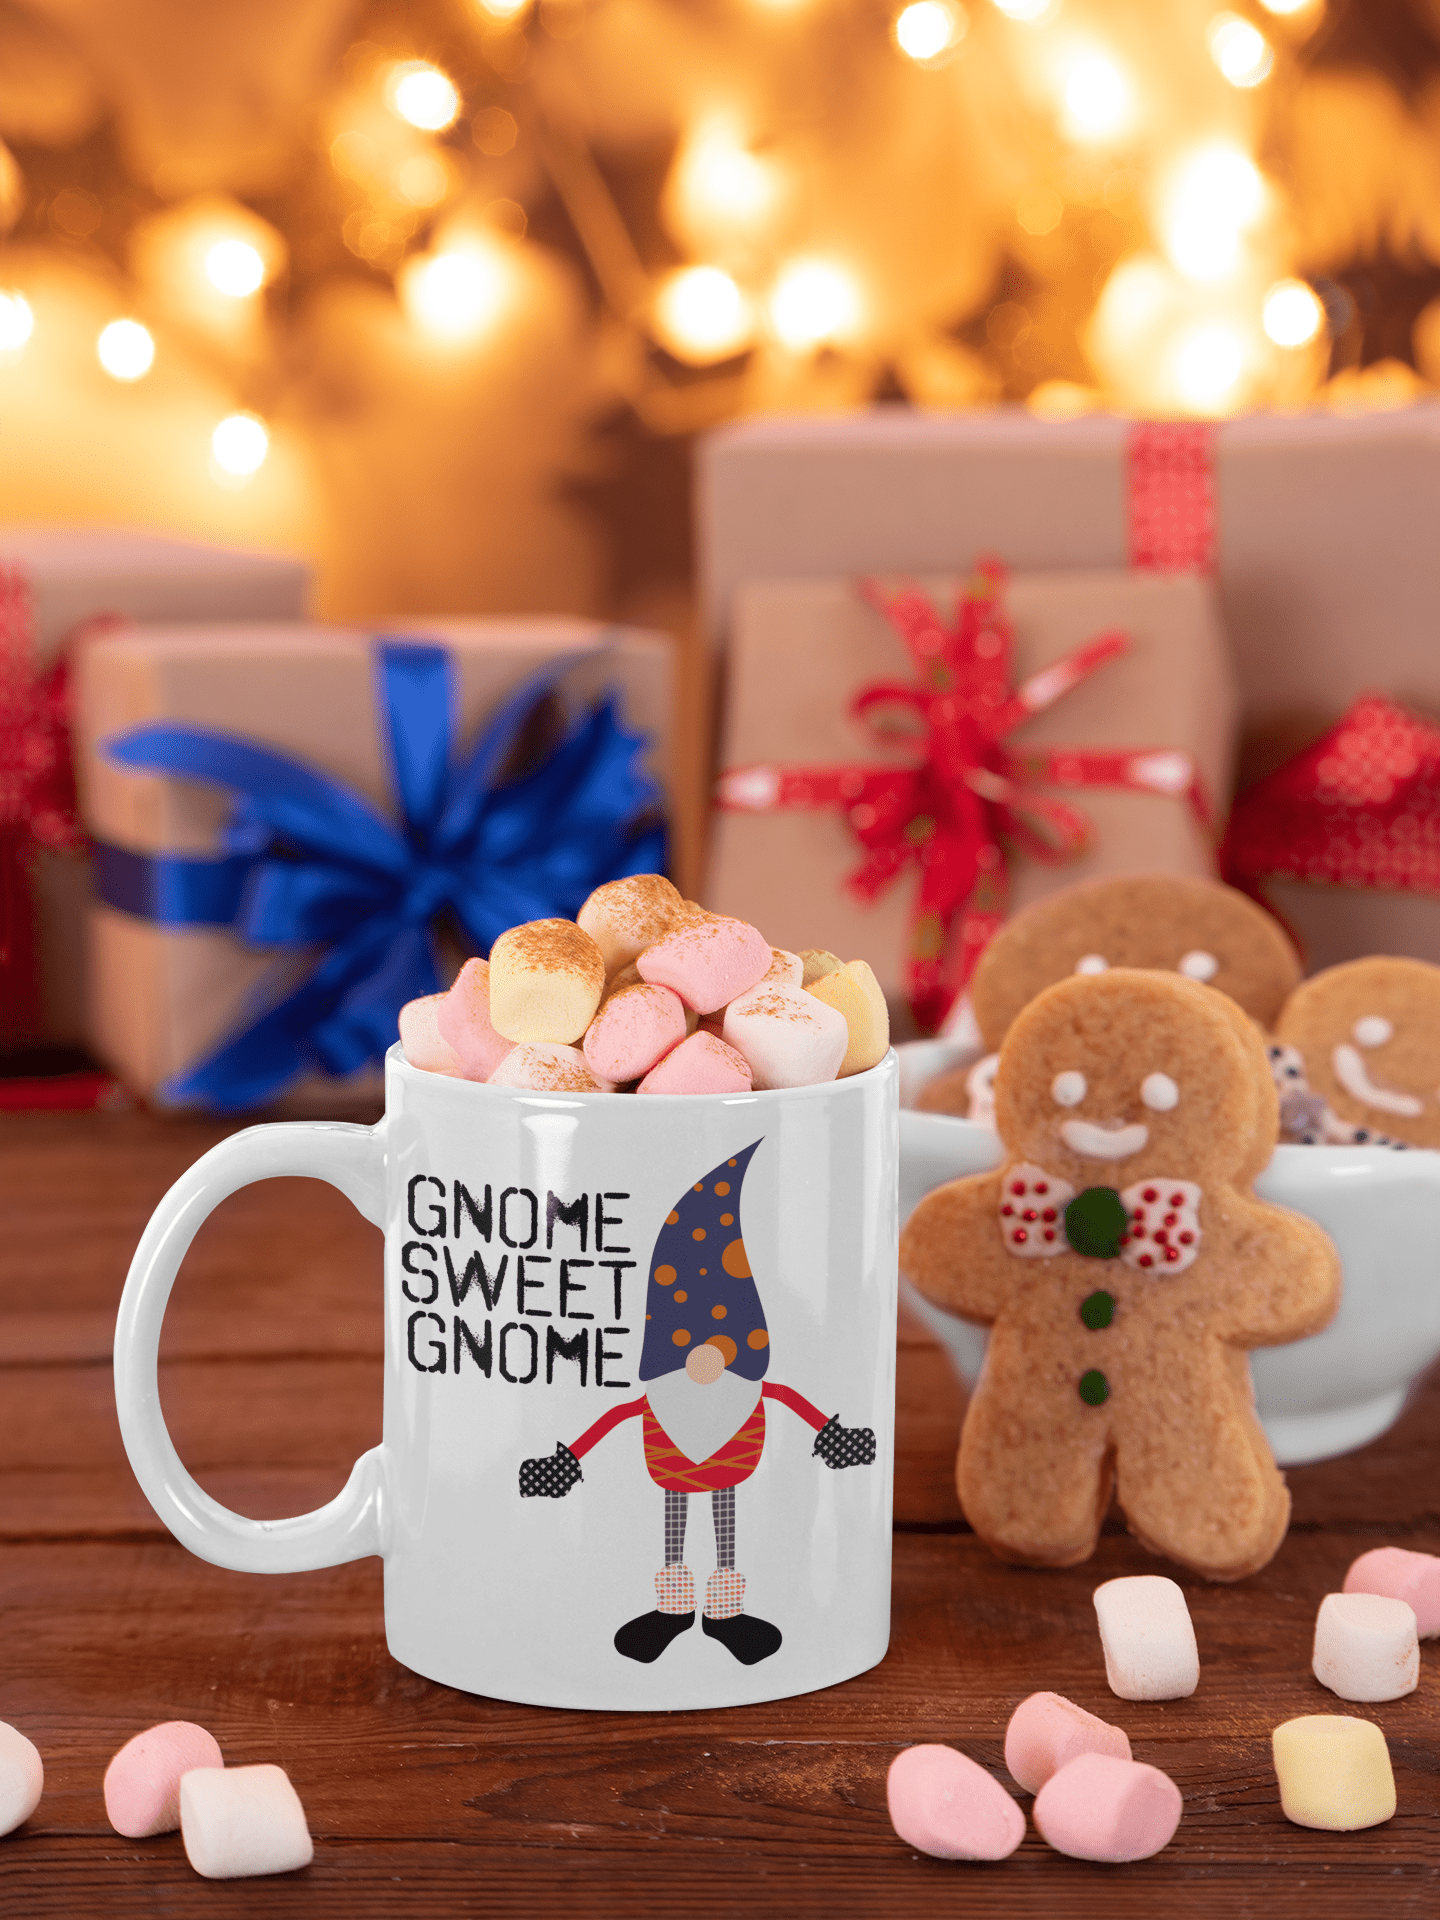 Gnome Sweet Gnome Christmas Holiday Coffee Tea Cup Mug Mug A Moment Of Now Women’s Boutique Clothing Online Lifestyle Store